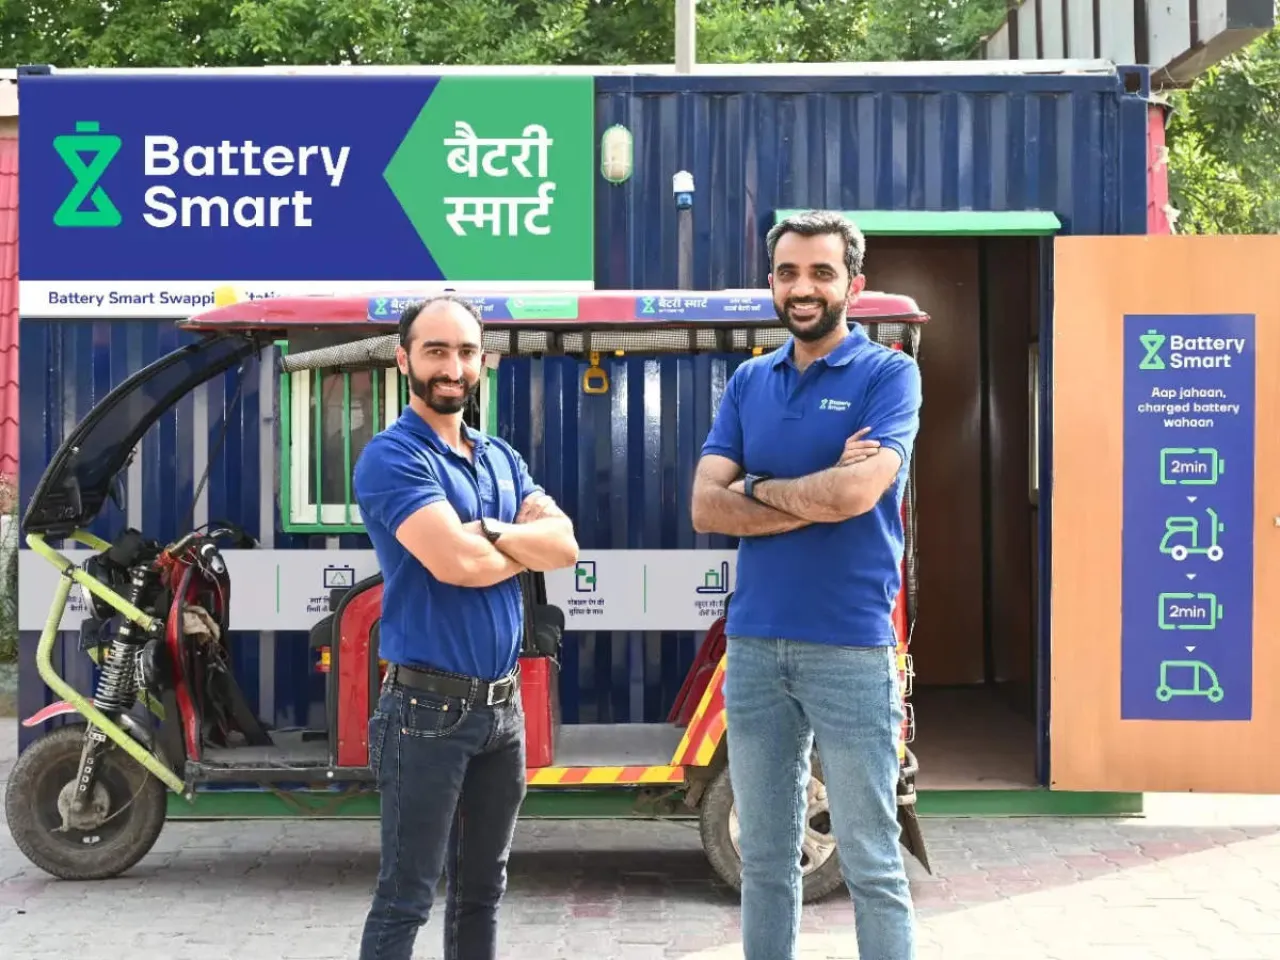 Battery Smart raises $33M in a pre-Series B round led by existing backers